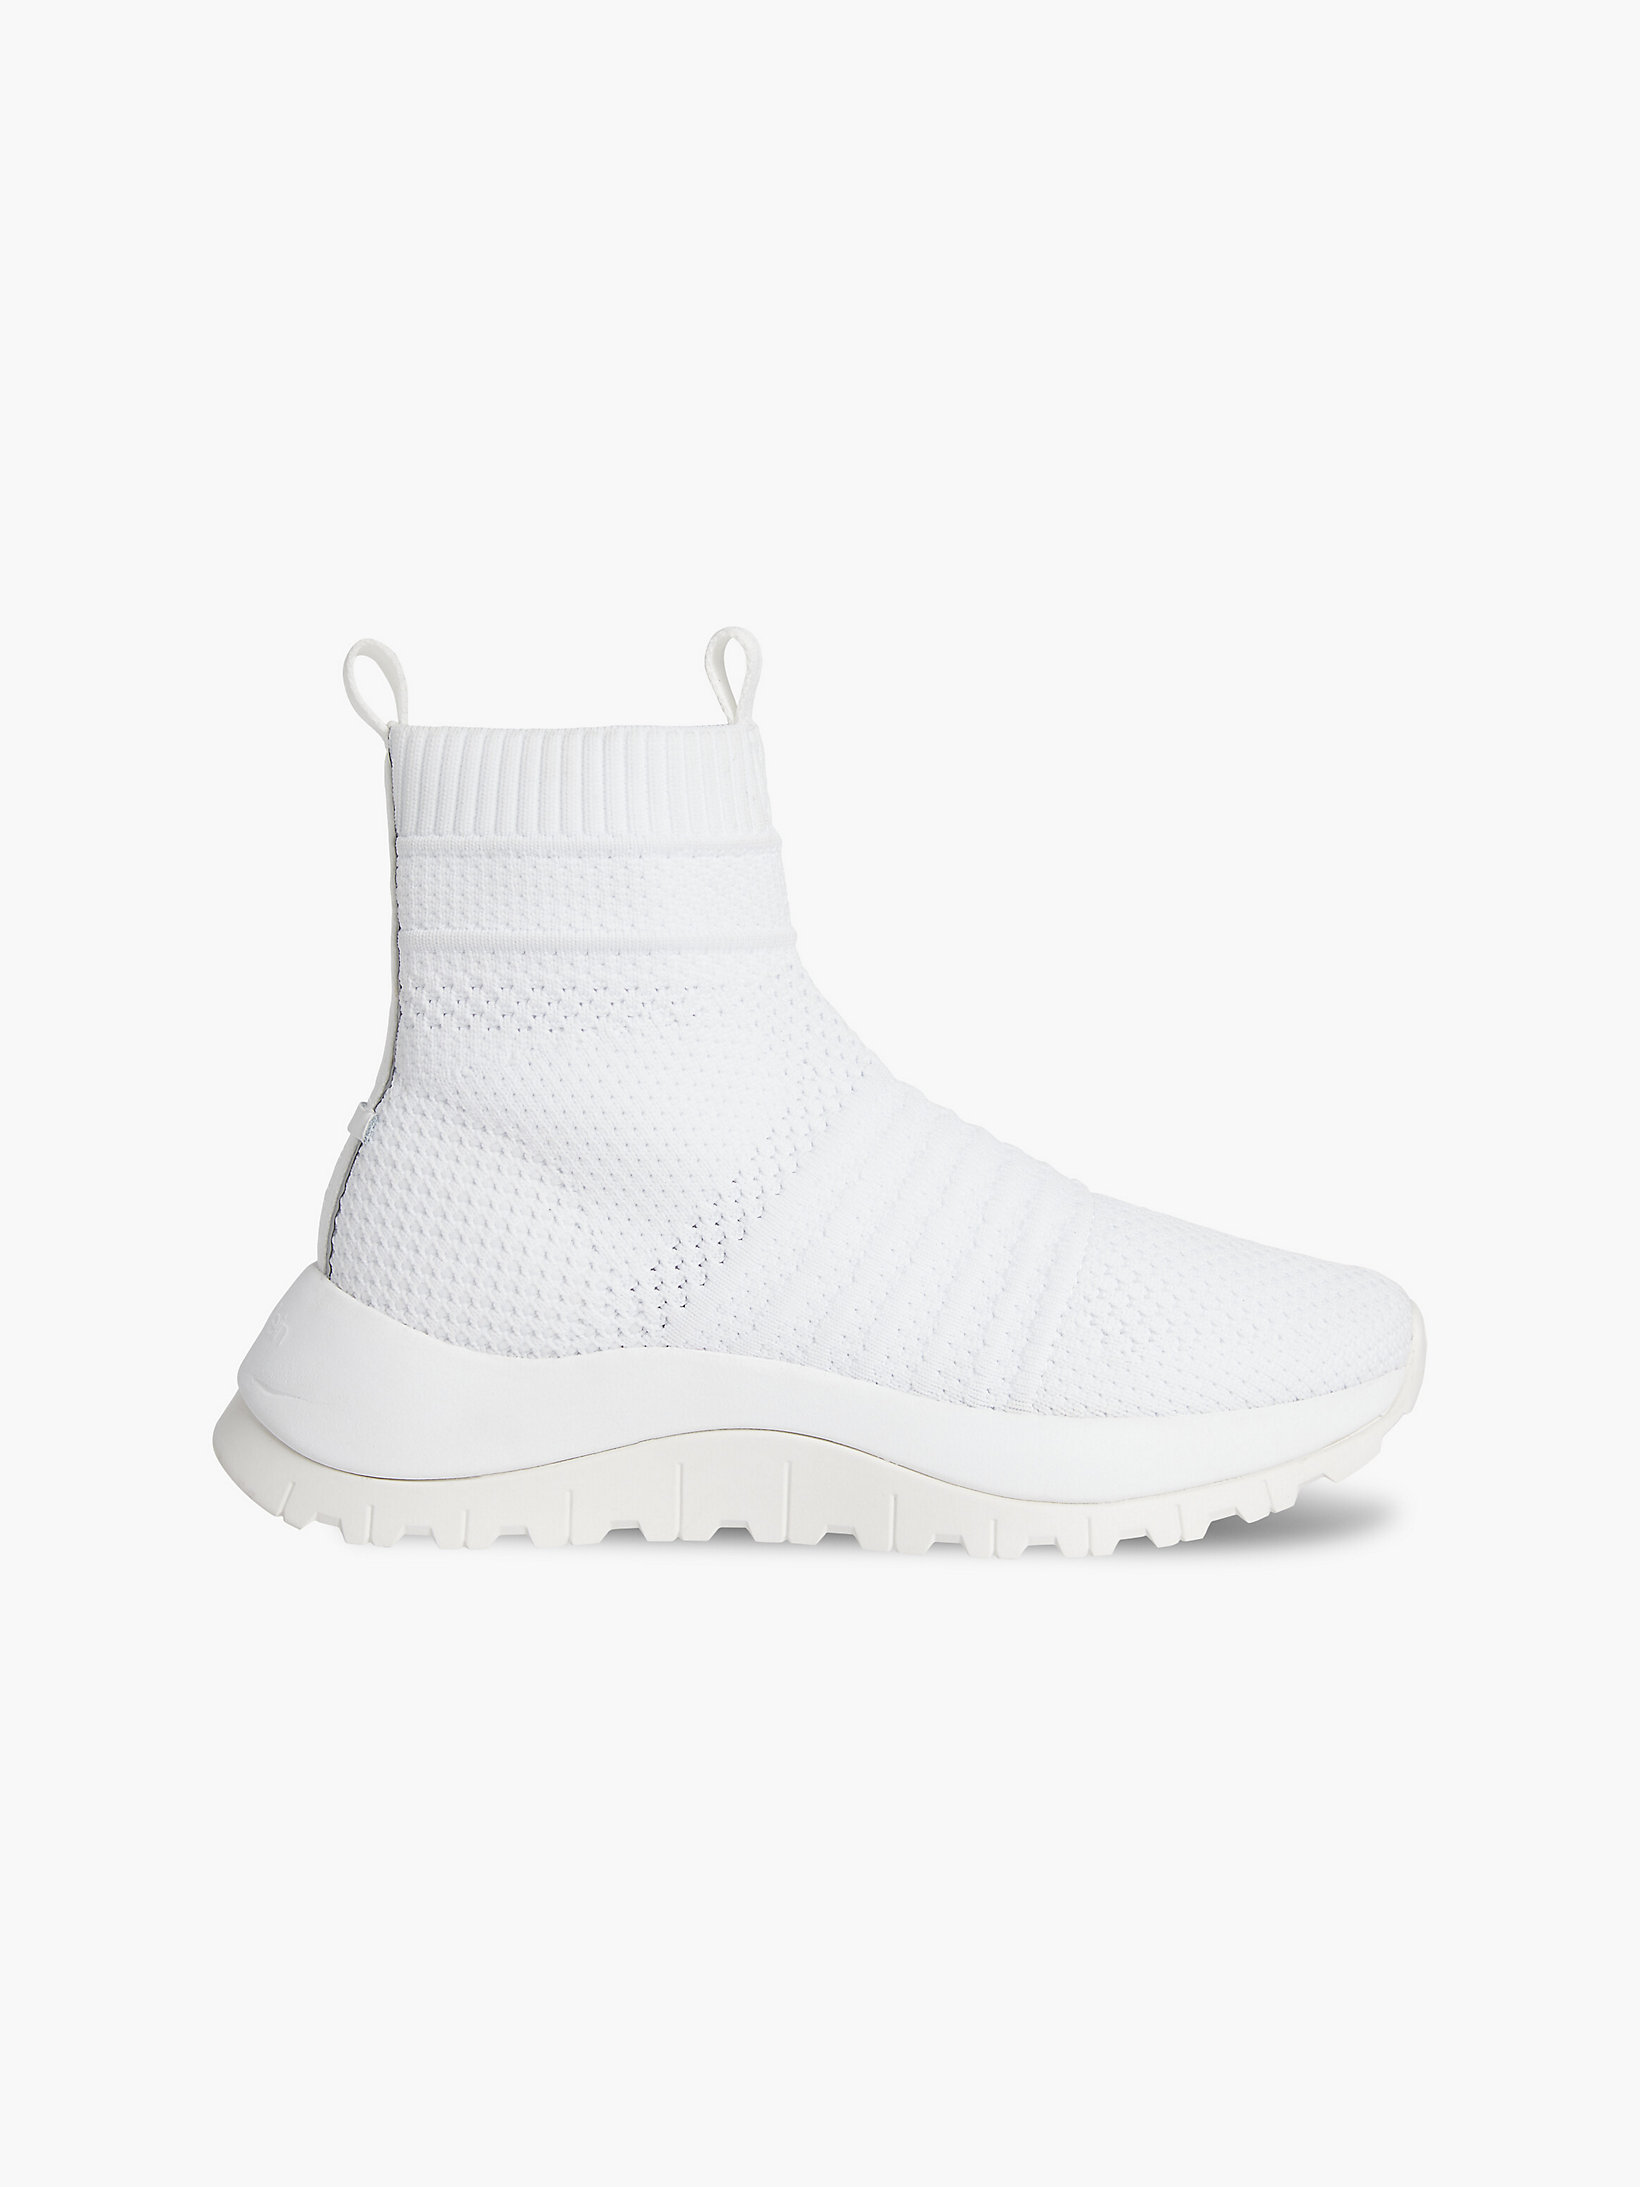 CK White Recycled Knit High-Top Trainers undefined women Calvin Klein